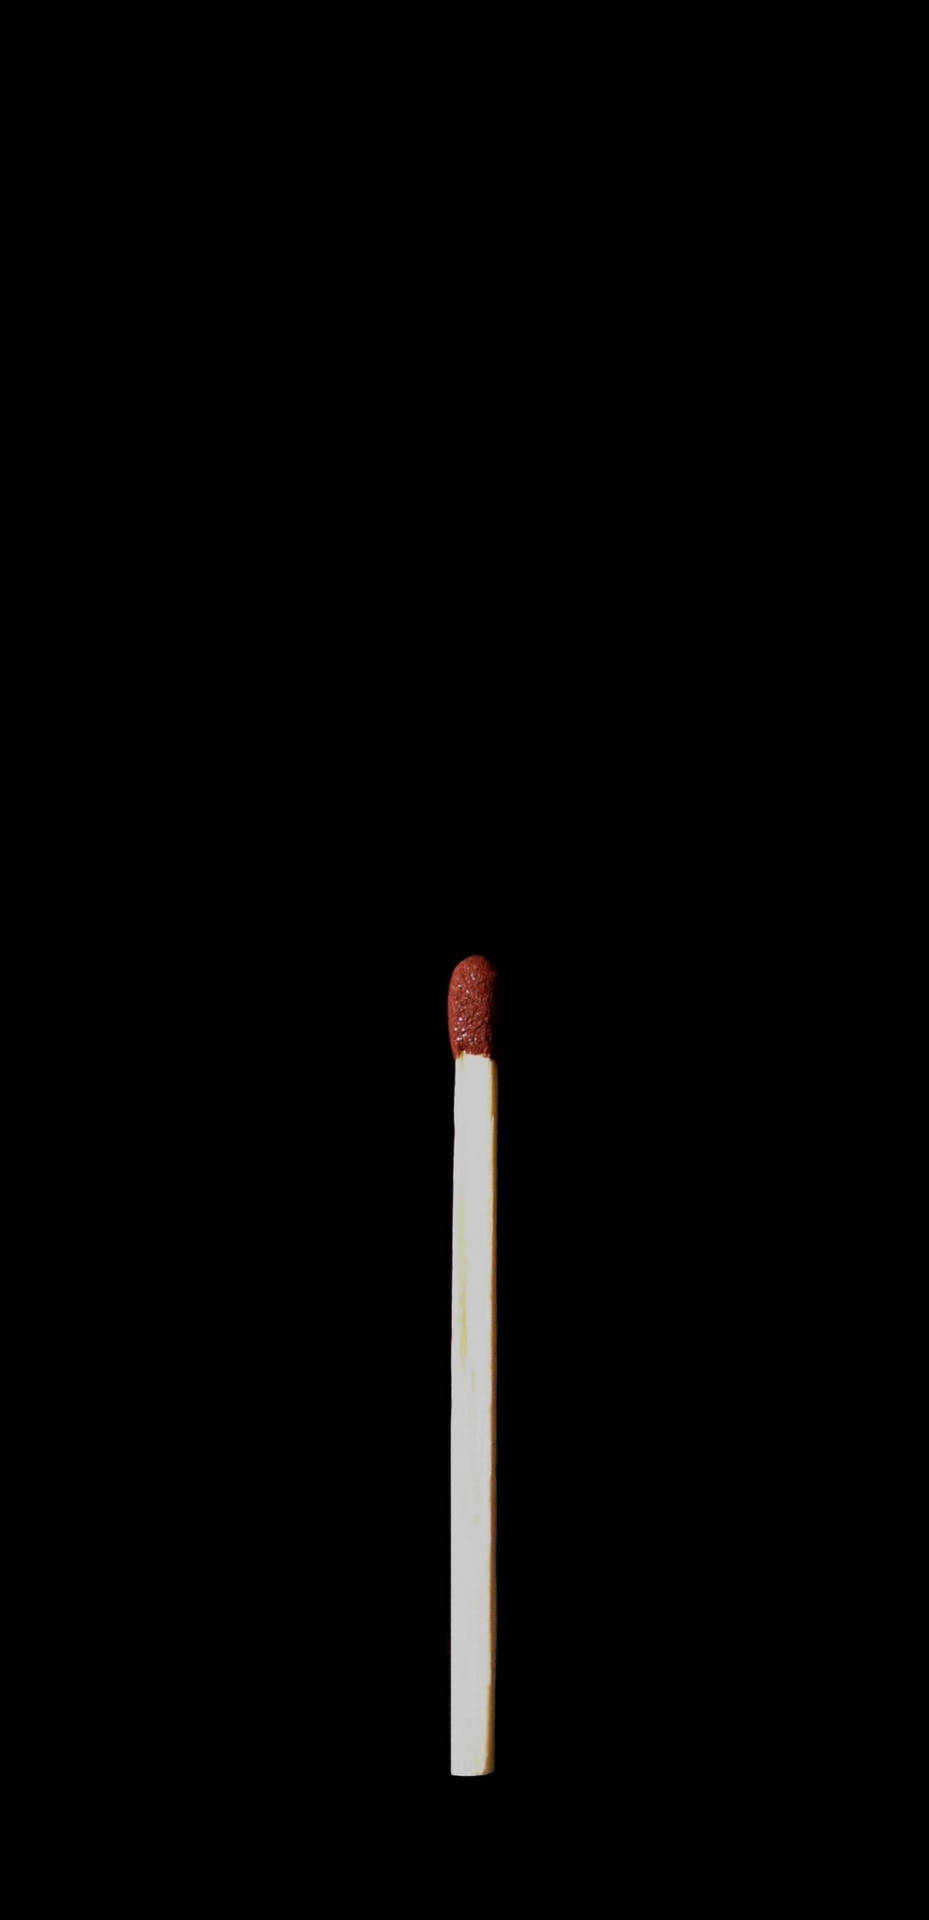 Single Red Tipped Match Wallpaper